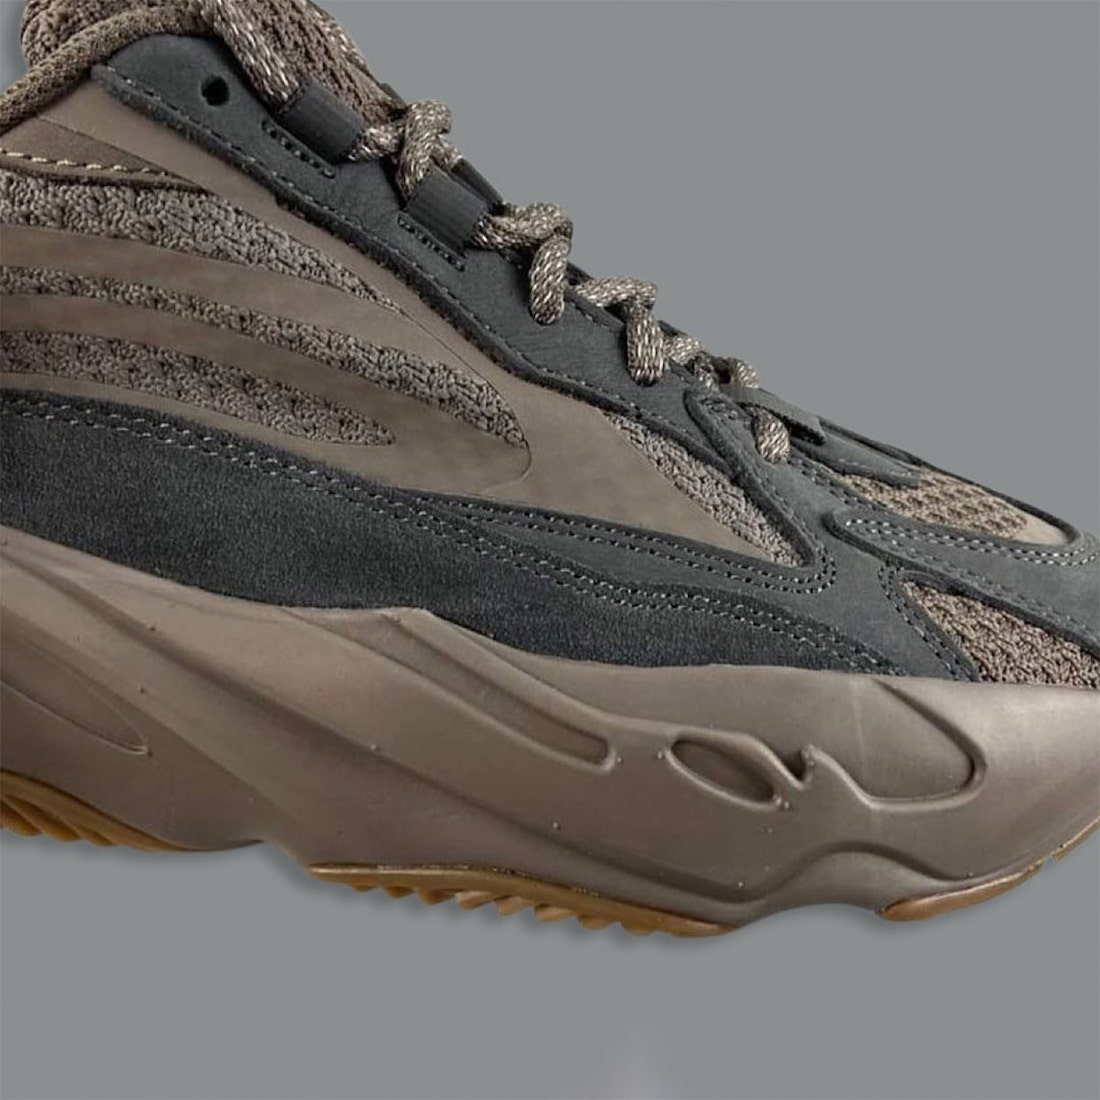 adidas Yeezy Boost 700 V2 Mauve Release Date Price 3 1